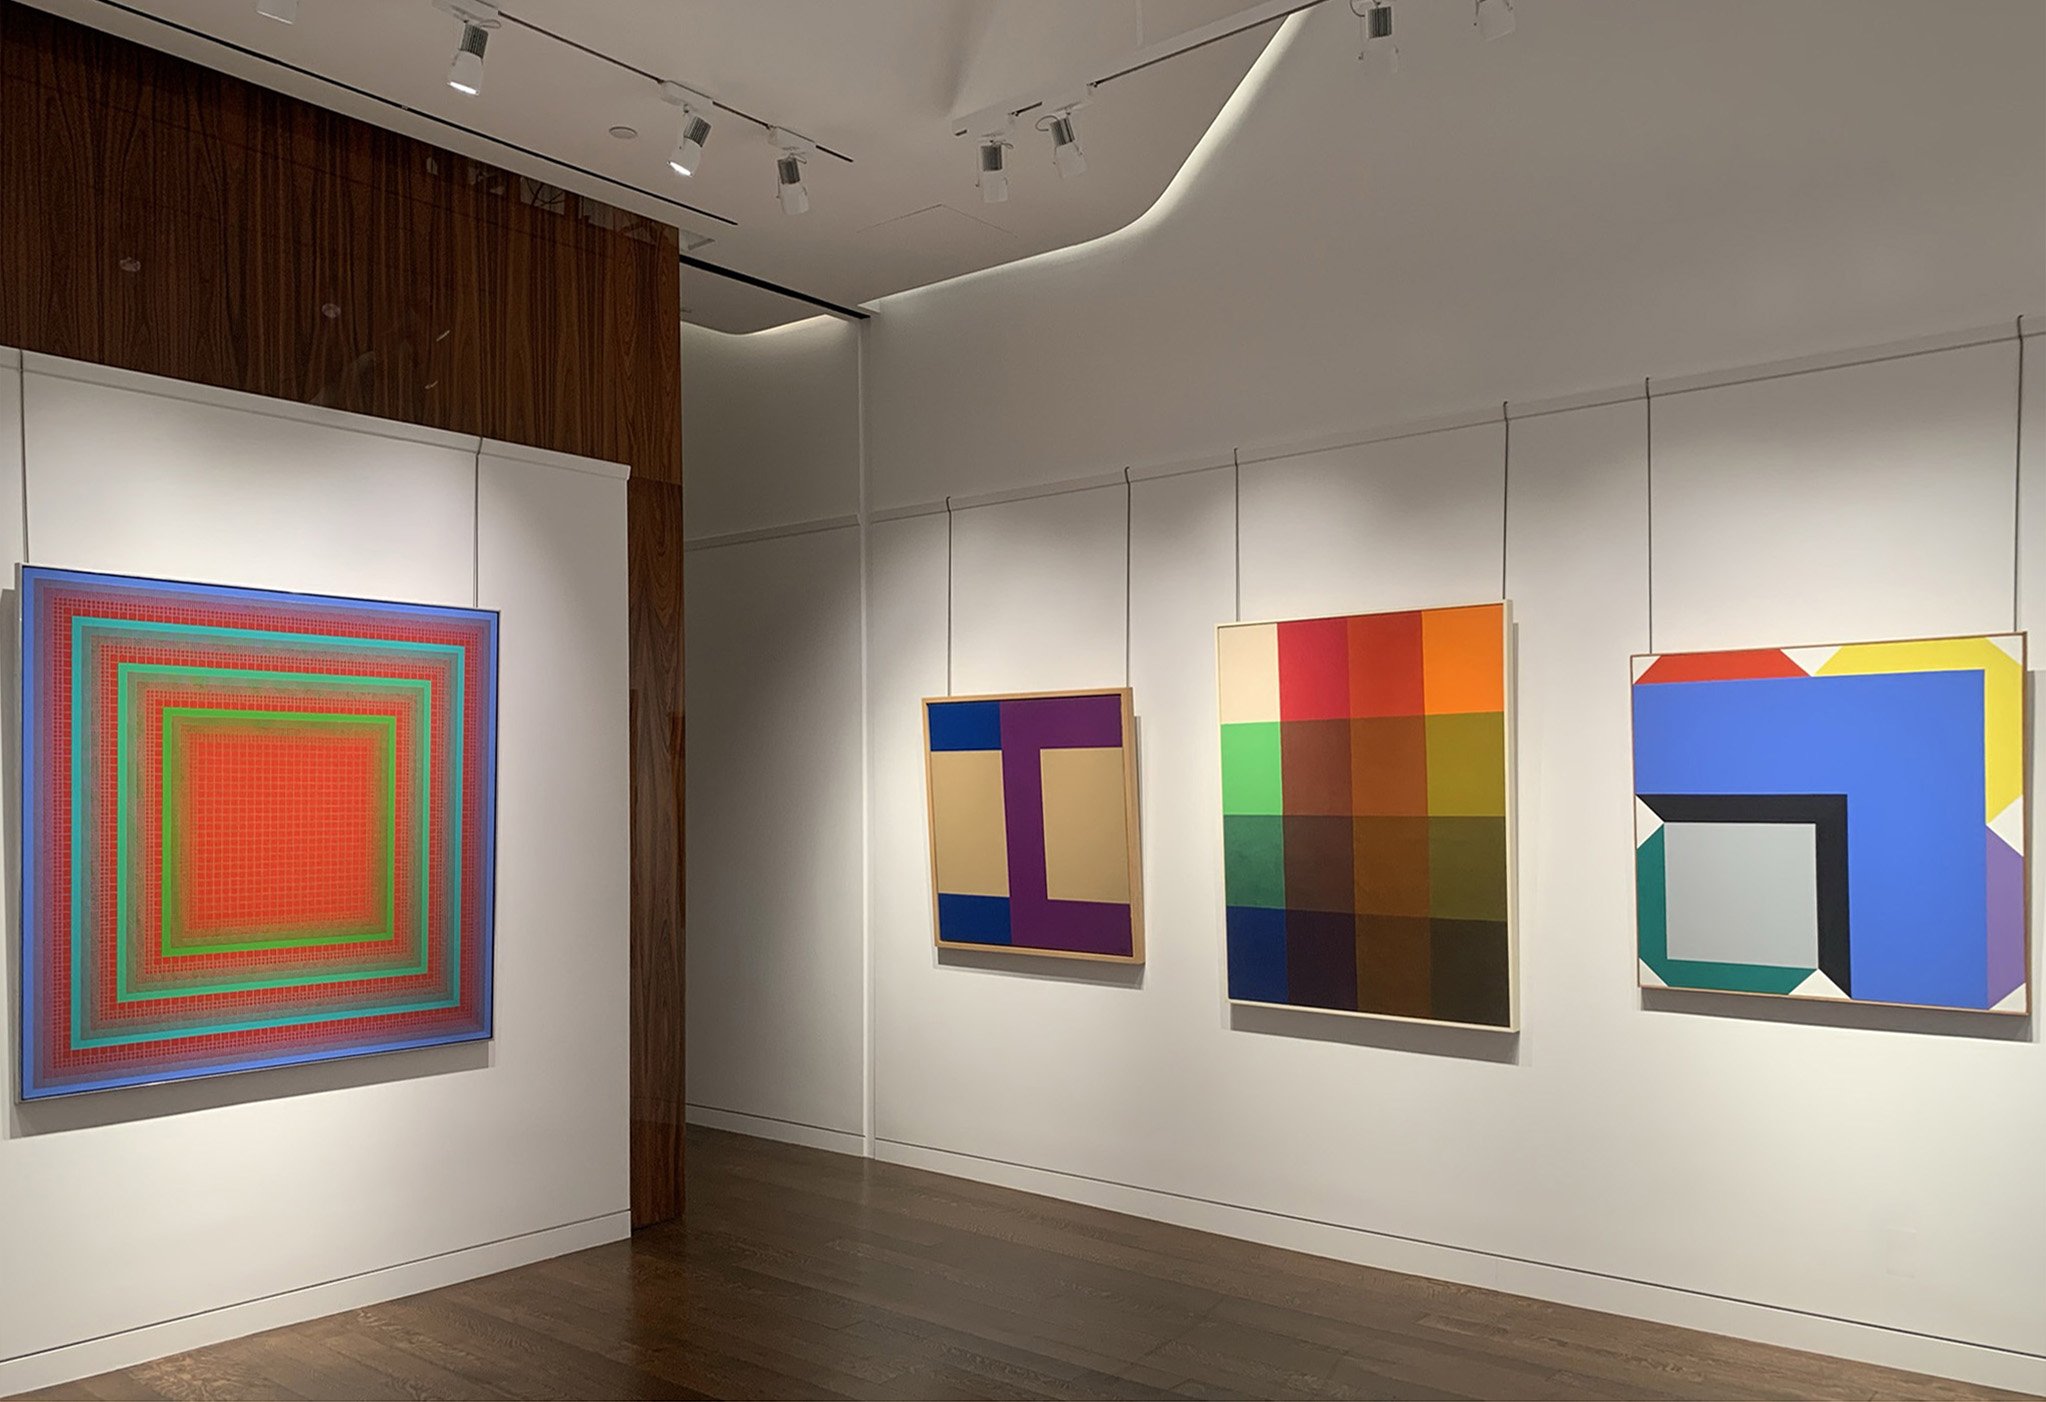  HOMAGE TO THE SQUARE: ALBERS' INFLUENCE ON GEOMETRIC ABSTRACTION Feb 18 - May 7, 2021 